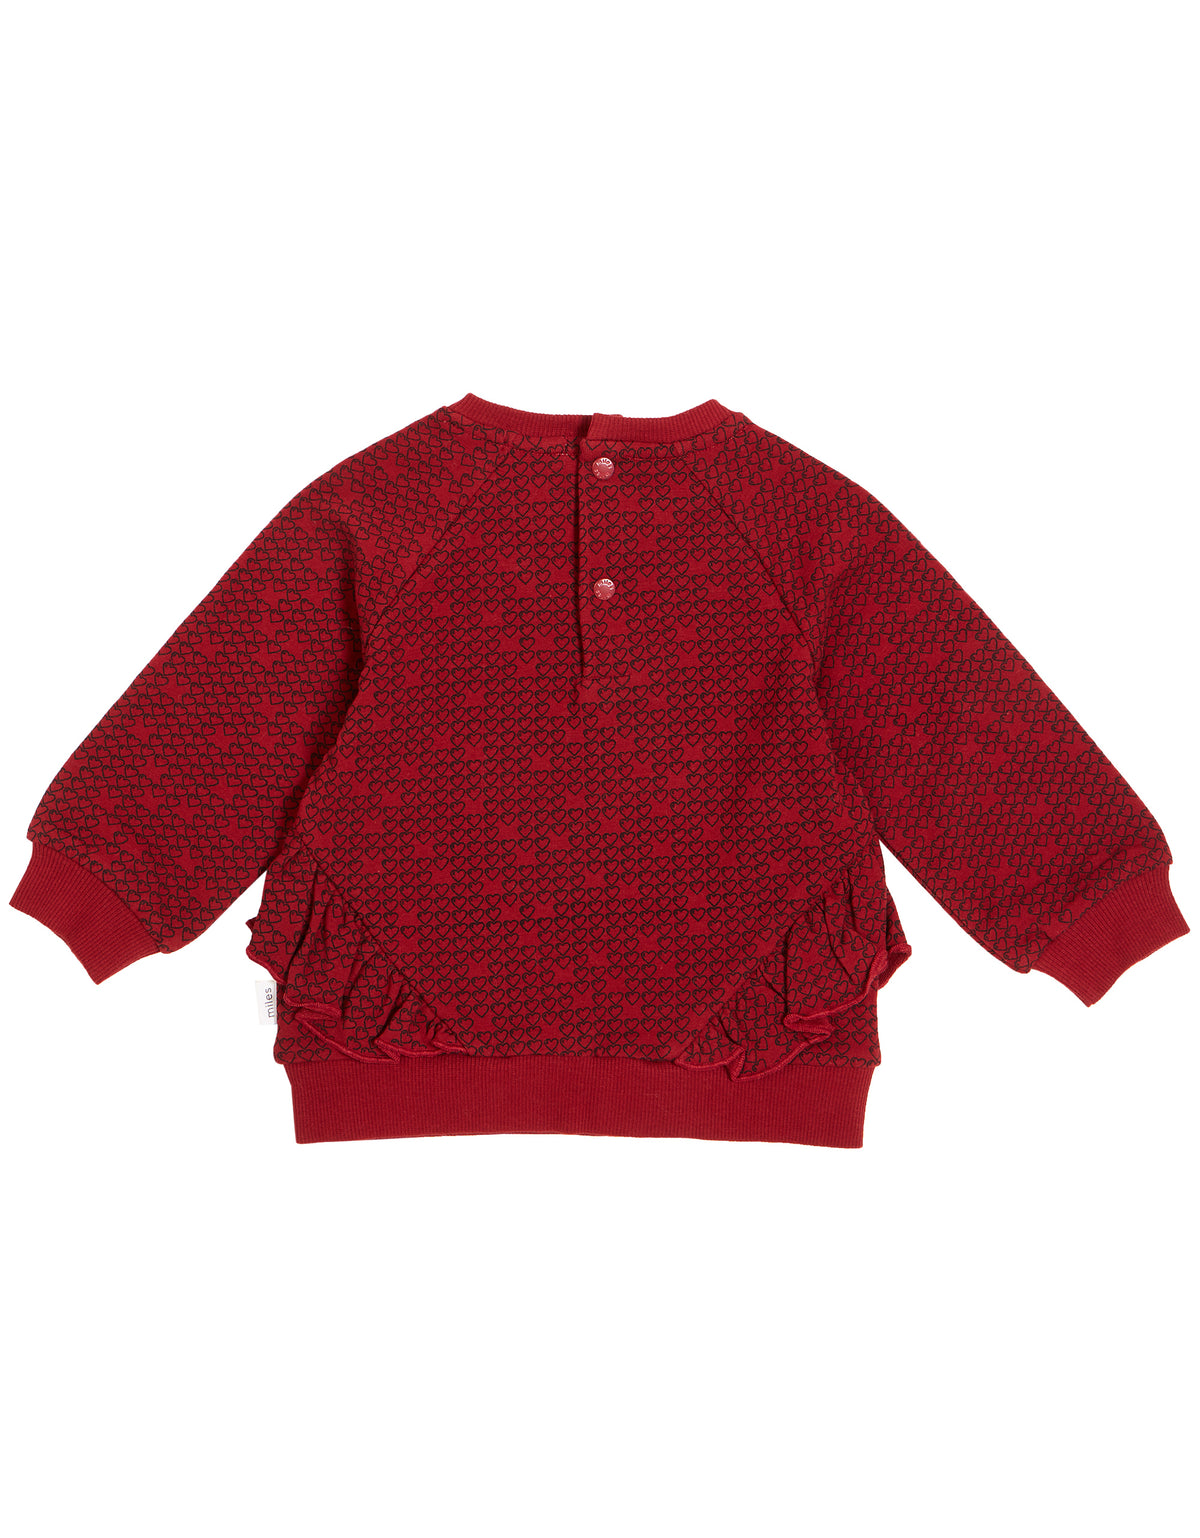 Red Sweatshirt with Hearts and Ruffles